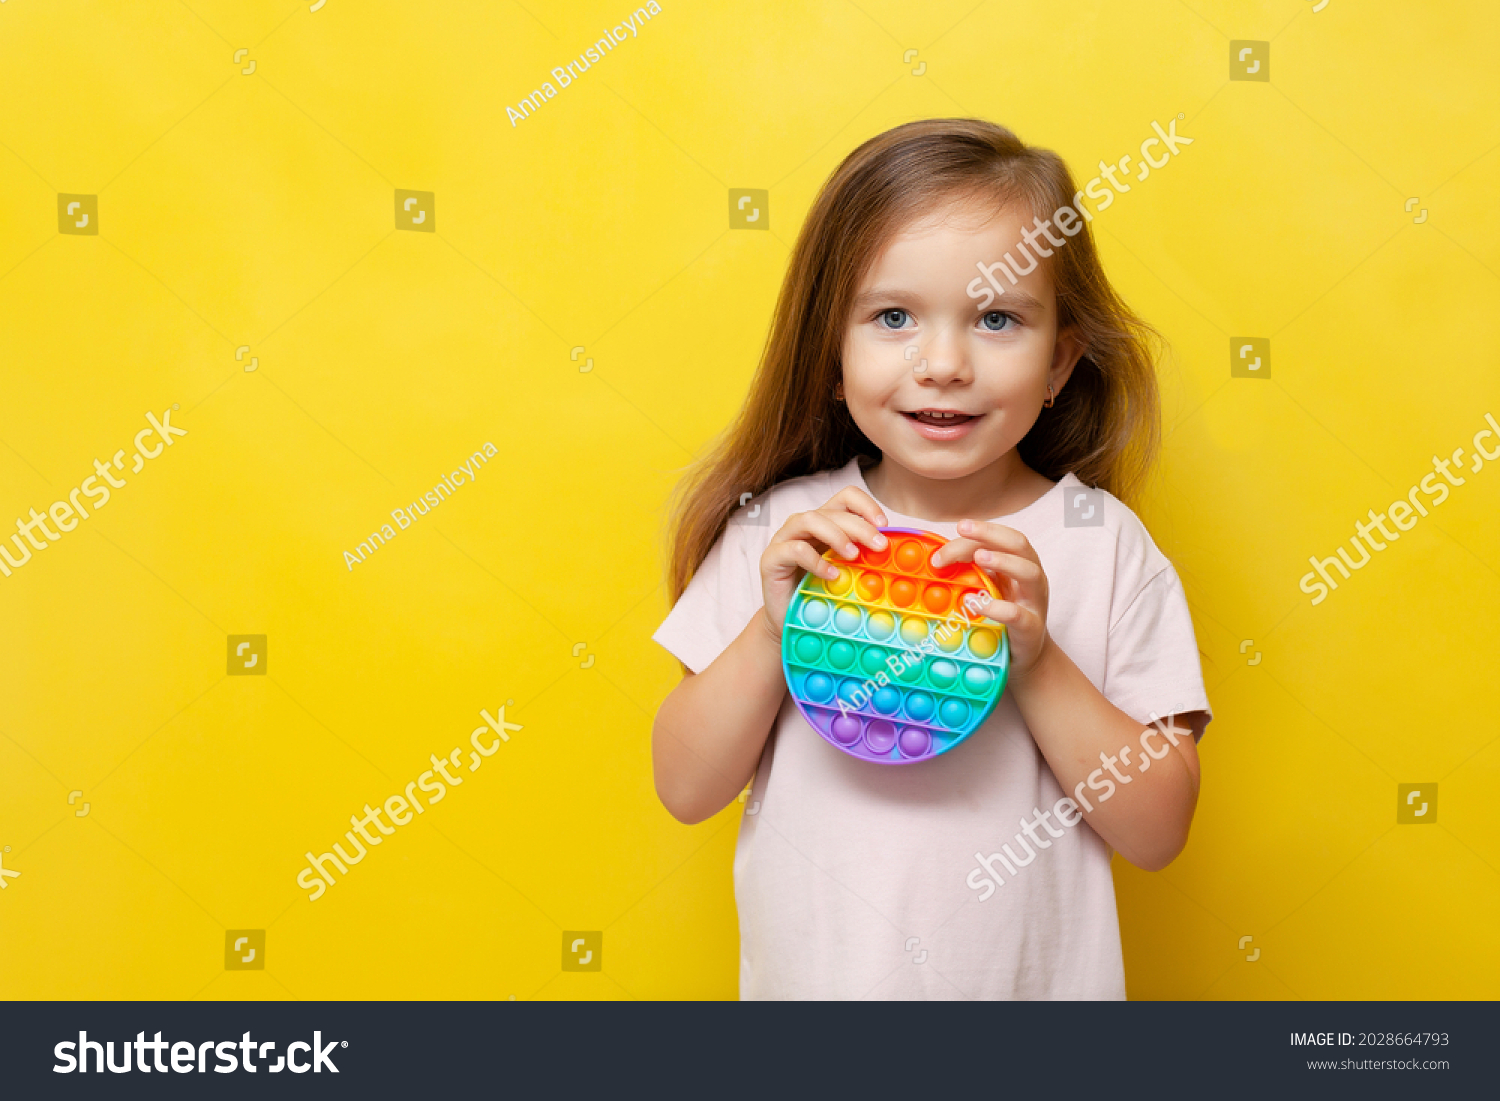 A beautiful cute girl holds a colored pop it toy in her hands and smiles. Yellow background. Anti-stress, emotions, good mood. A place for text. Trend #2028664793